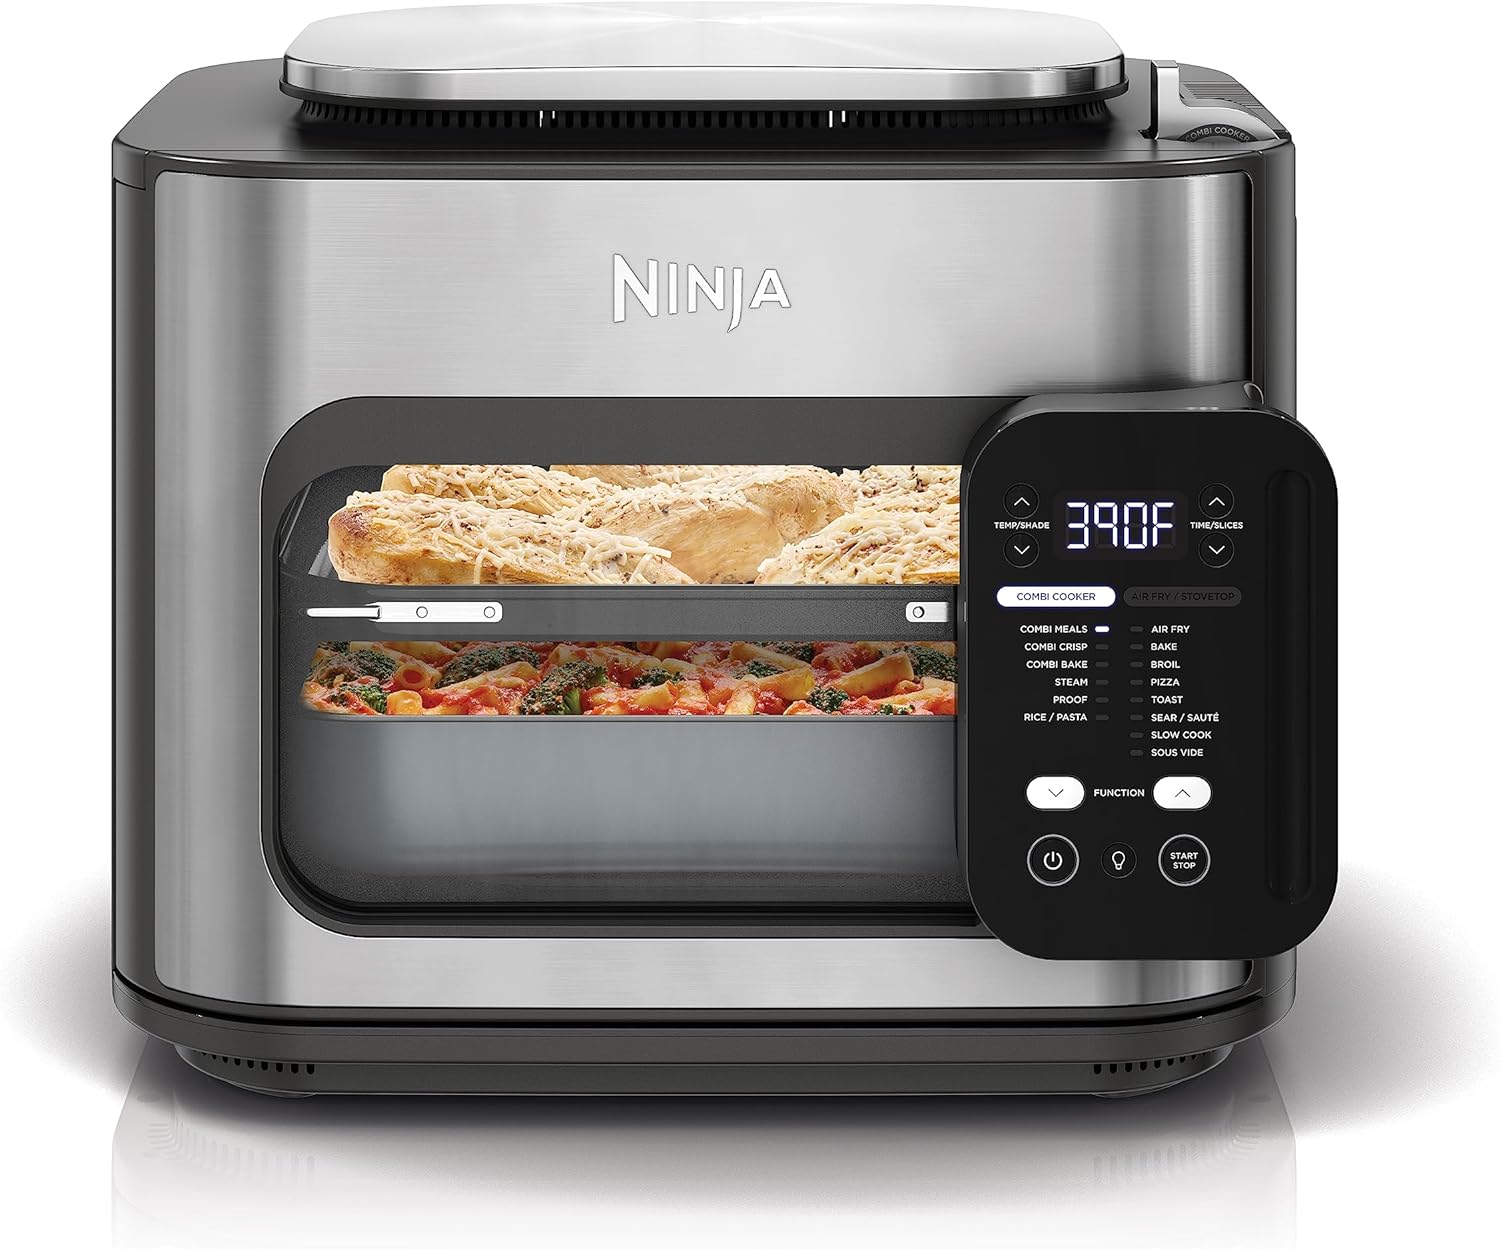 Ninja Combi All-in-One Multicooker, Oven, & Air Fryer, Complete Meals in 15 Mins, 14-in-1 Functions, Combi Cooker + Air Fry, Bake, Roast, Slow Cook and More, 3 Accessories, Stainless Steel, SFP701